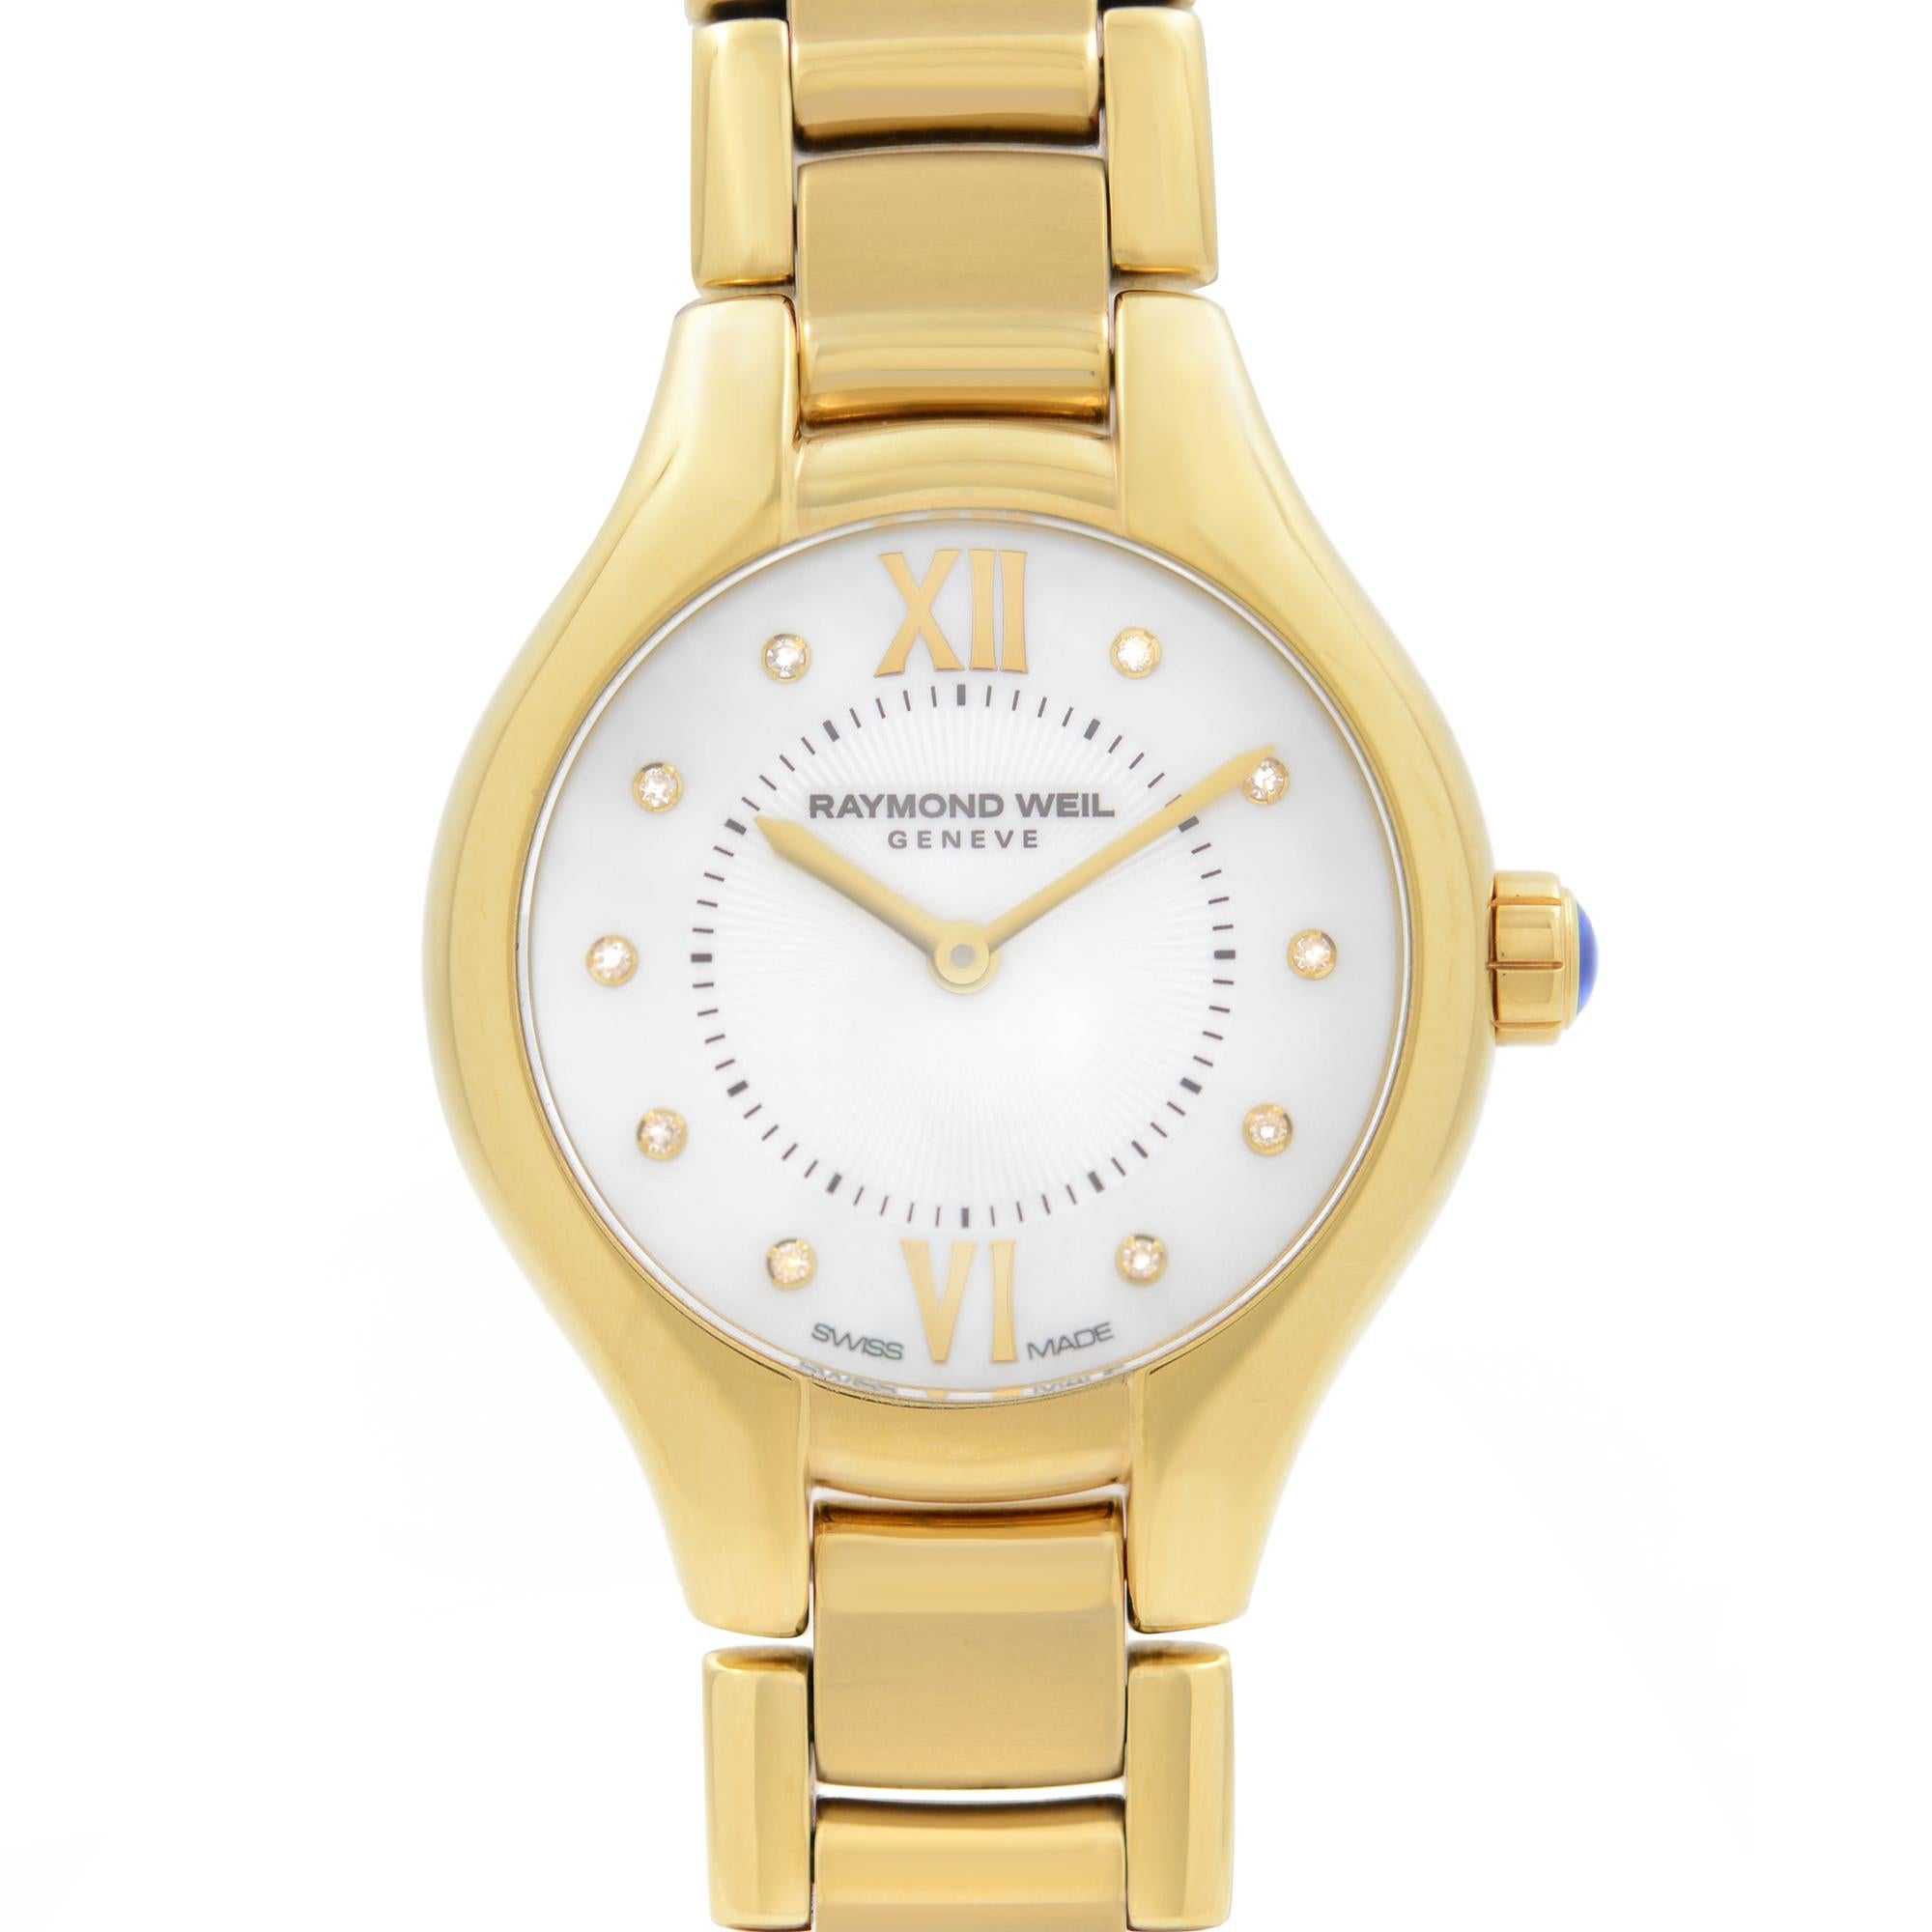 Pre-owned Raymond Weil Noemia Yellow Gold PVD Steel MOP Dial Ladies Watch 5124-P-00985. The Watch Band Shows Minor Wear Signs Mid Links. Original Box and Papers are Included. Covered by 1-year Chronostore Warranty.
Details:
MSRP 1350
Brand RAYMOND